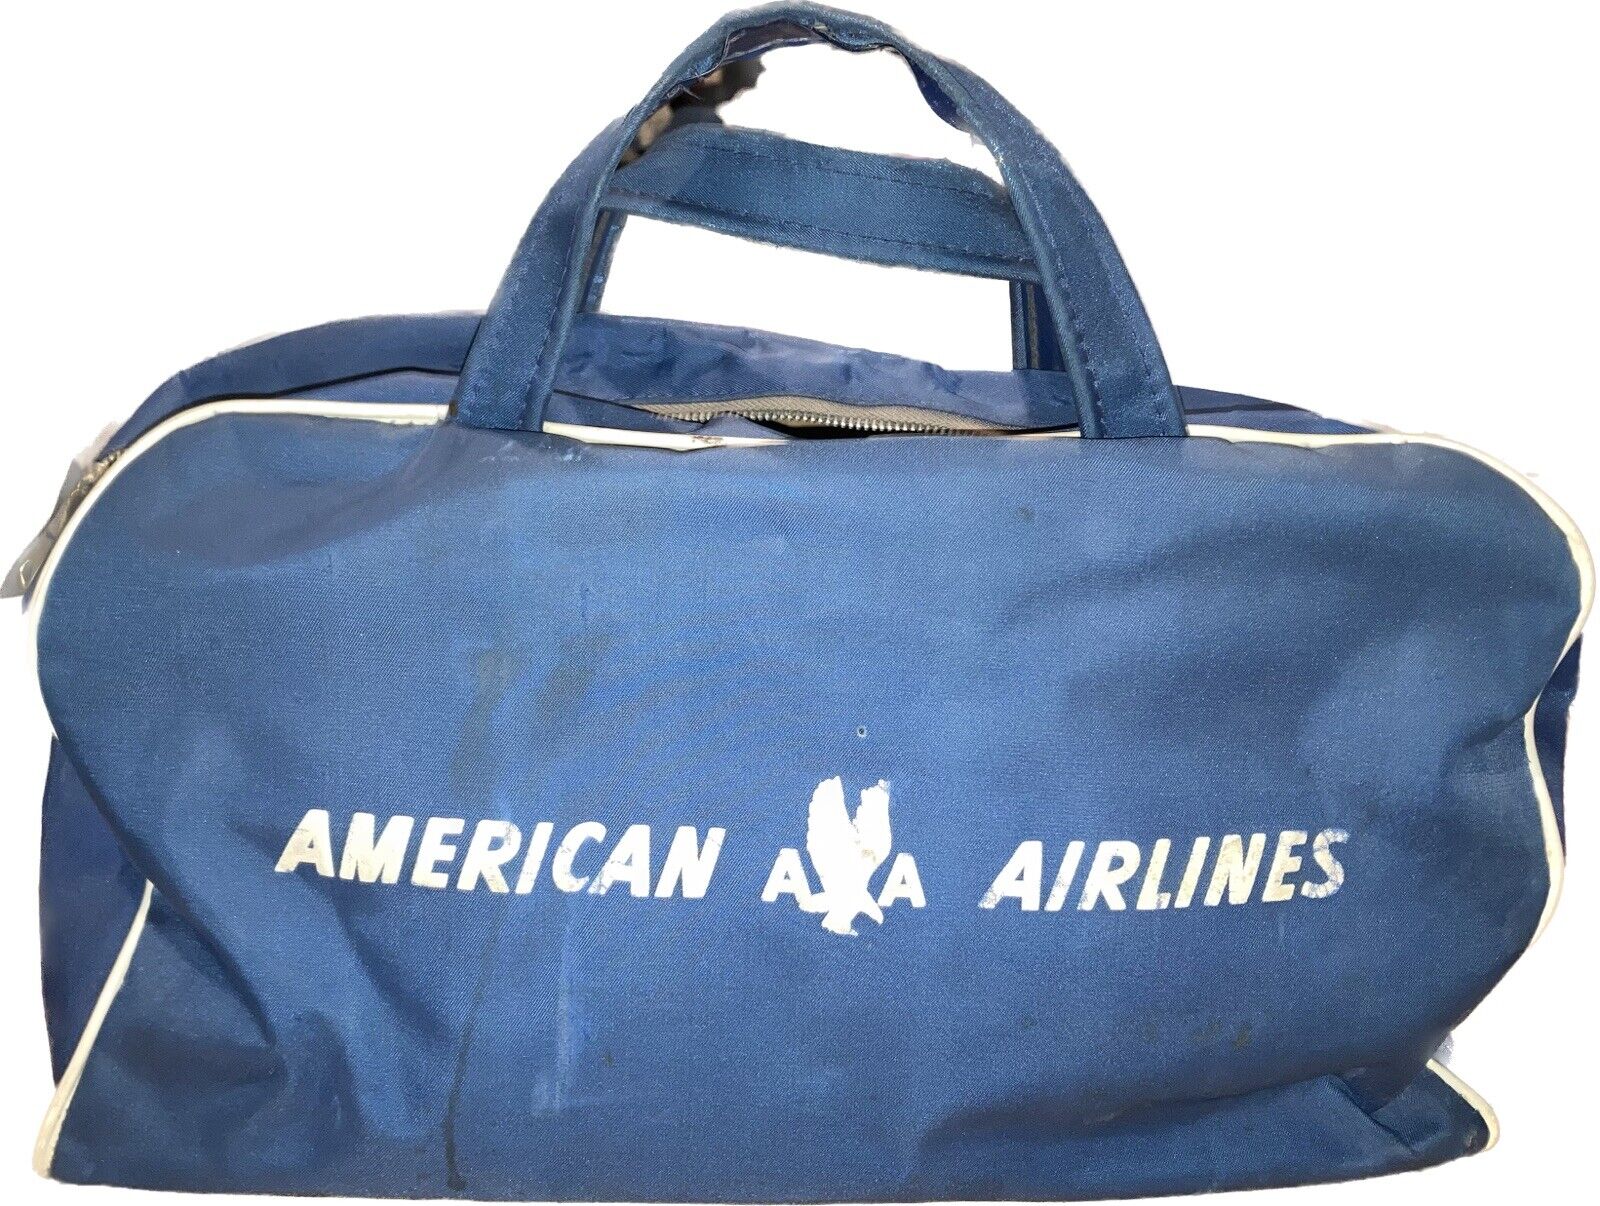 Vintage American Airlines Flight Attendant Bag  Possibly From The 80s.